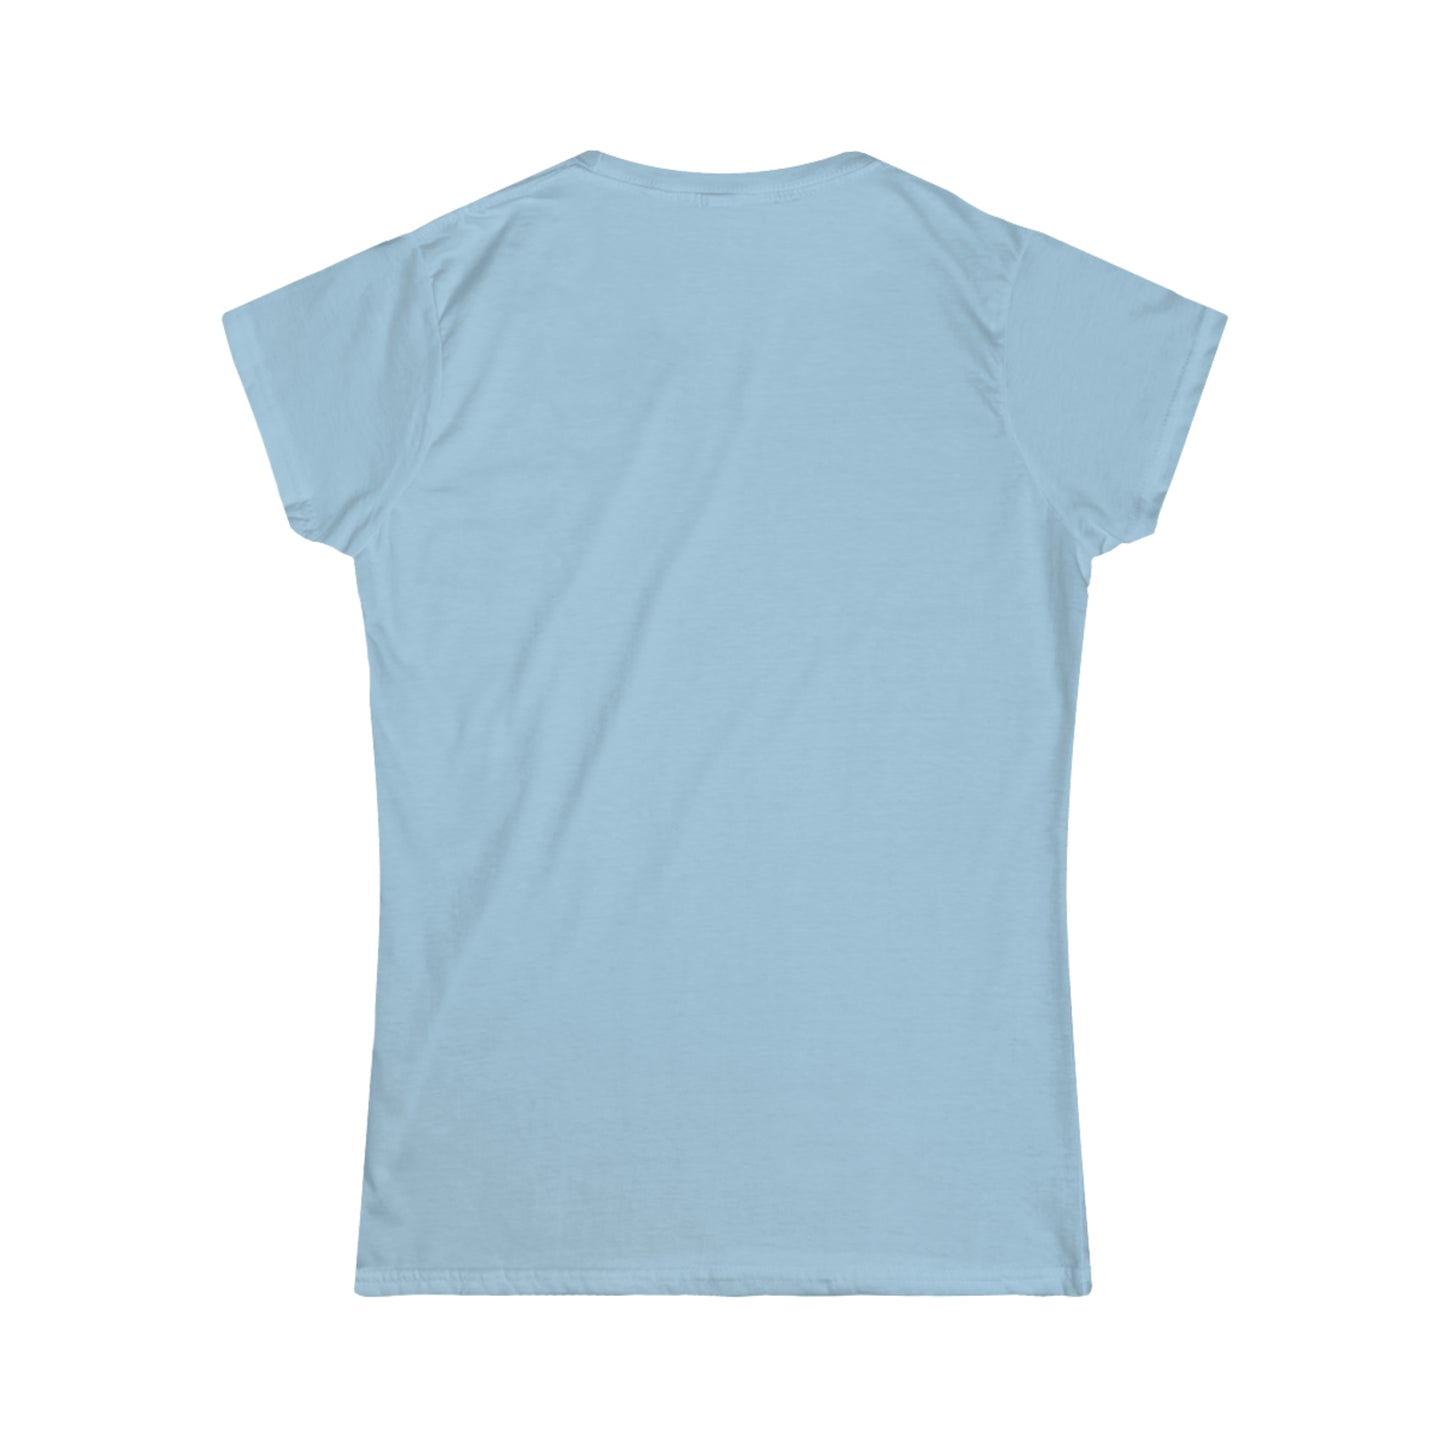 Mother's Day Gift Idea: Women's Softstyle Tee Mama T-Shirt